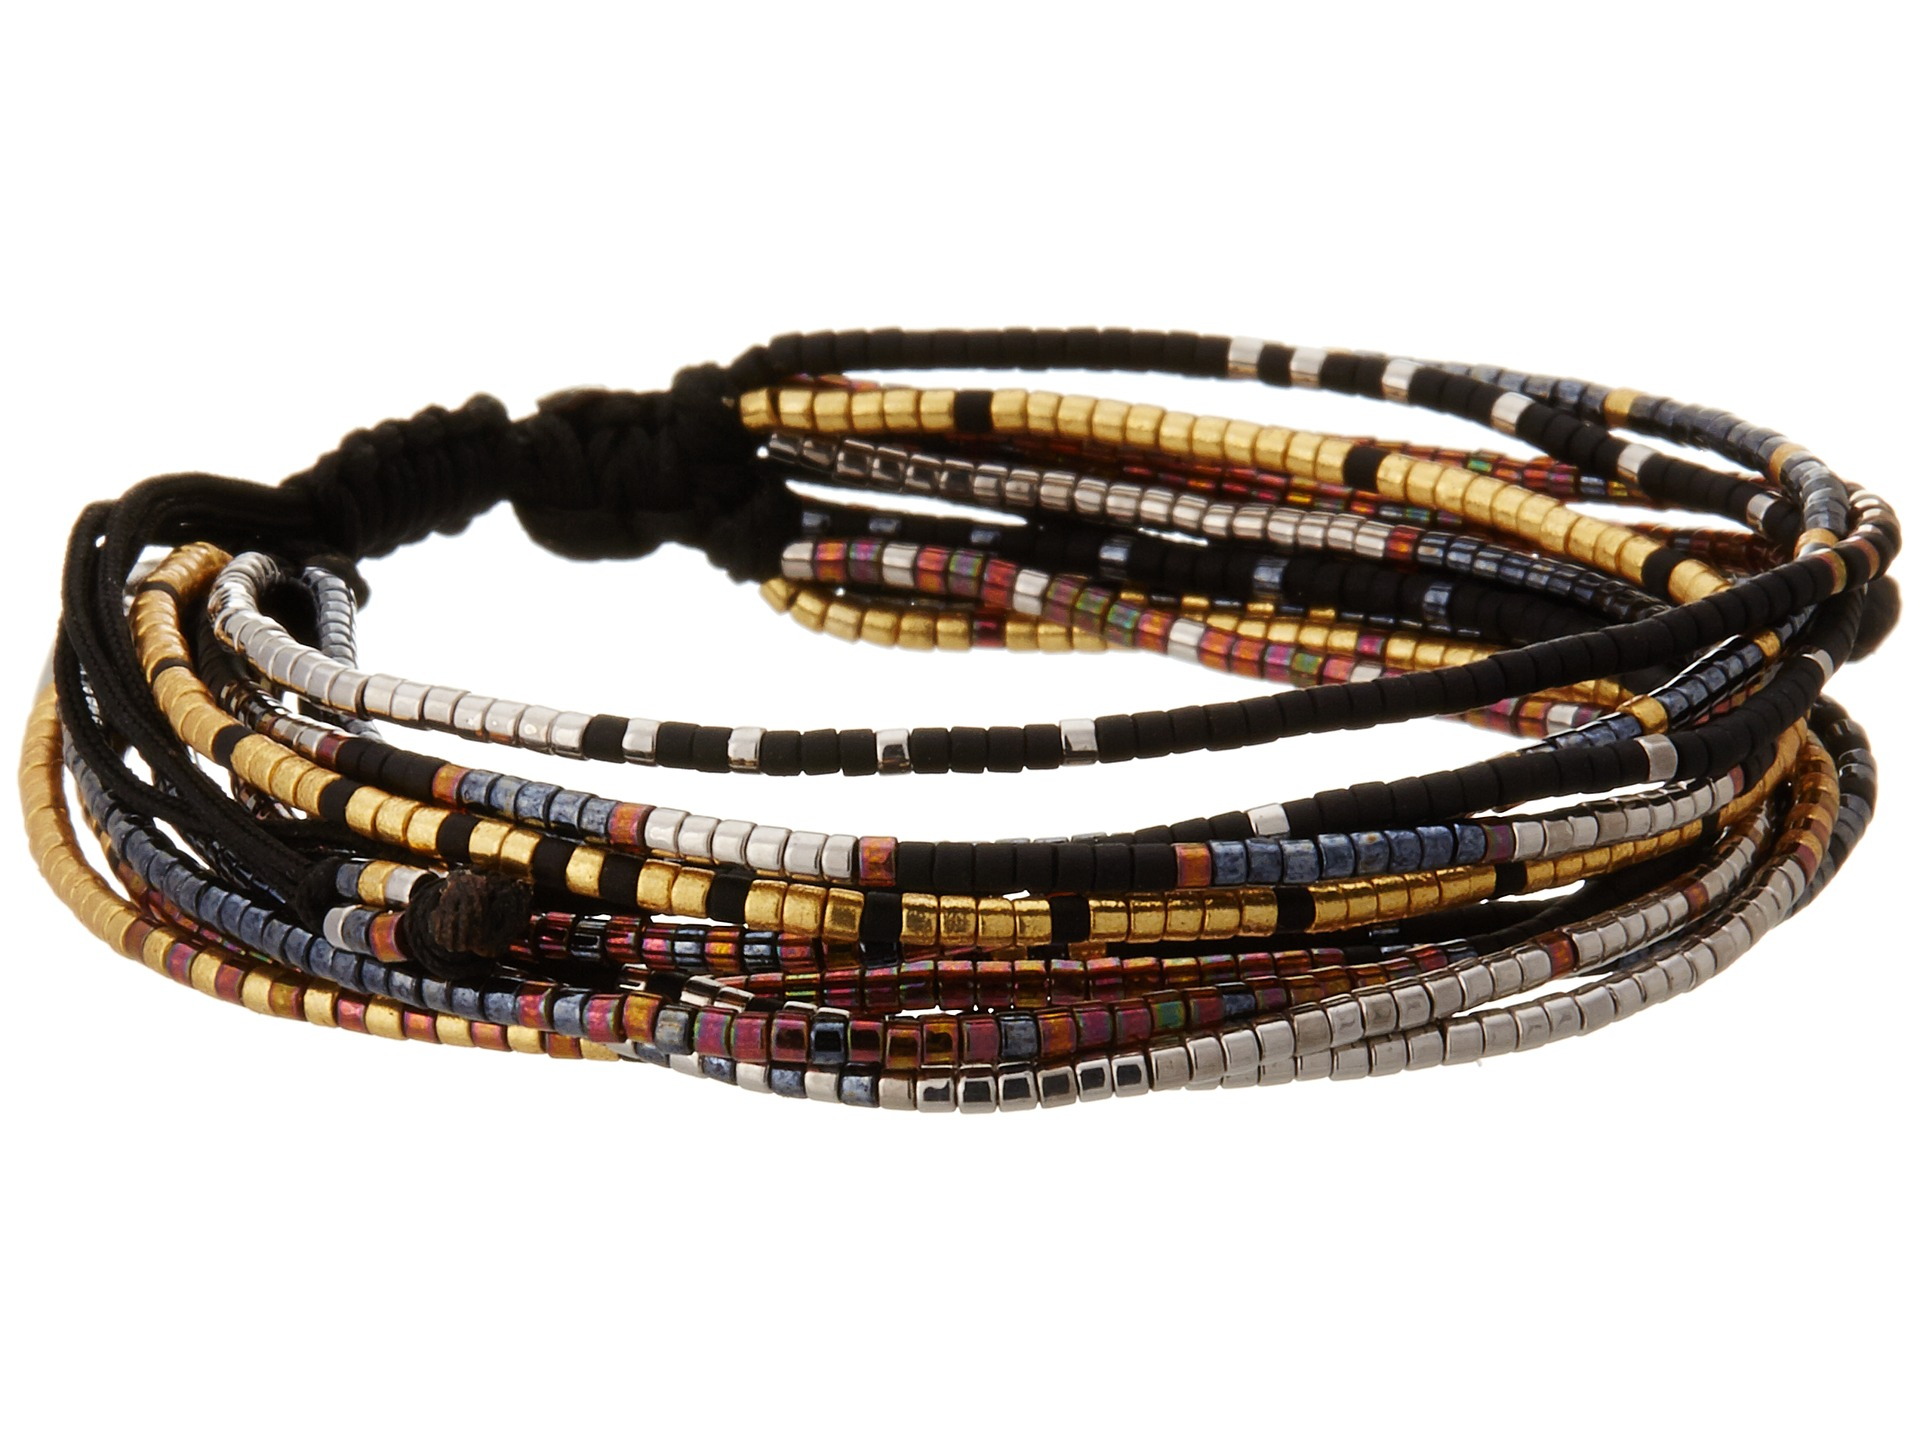 Black and Gold Seed Bead Necklace-Single Strand